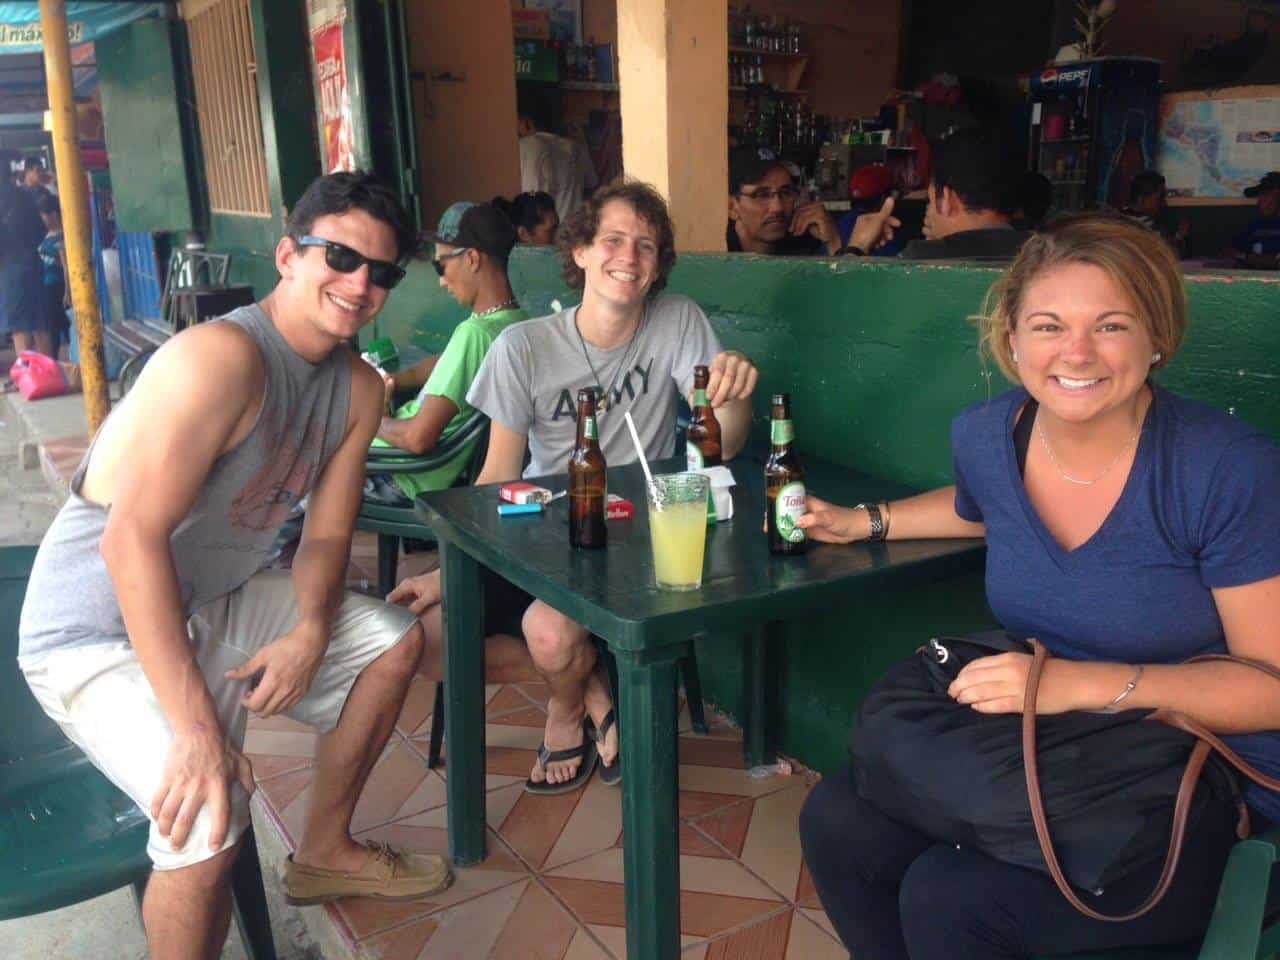 Rachel, Mike and I on a weekend trip through Nicaragua